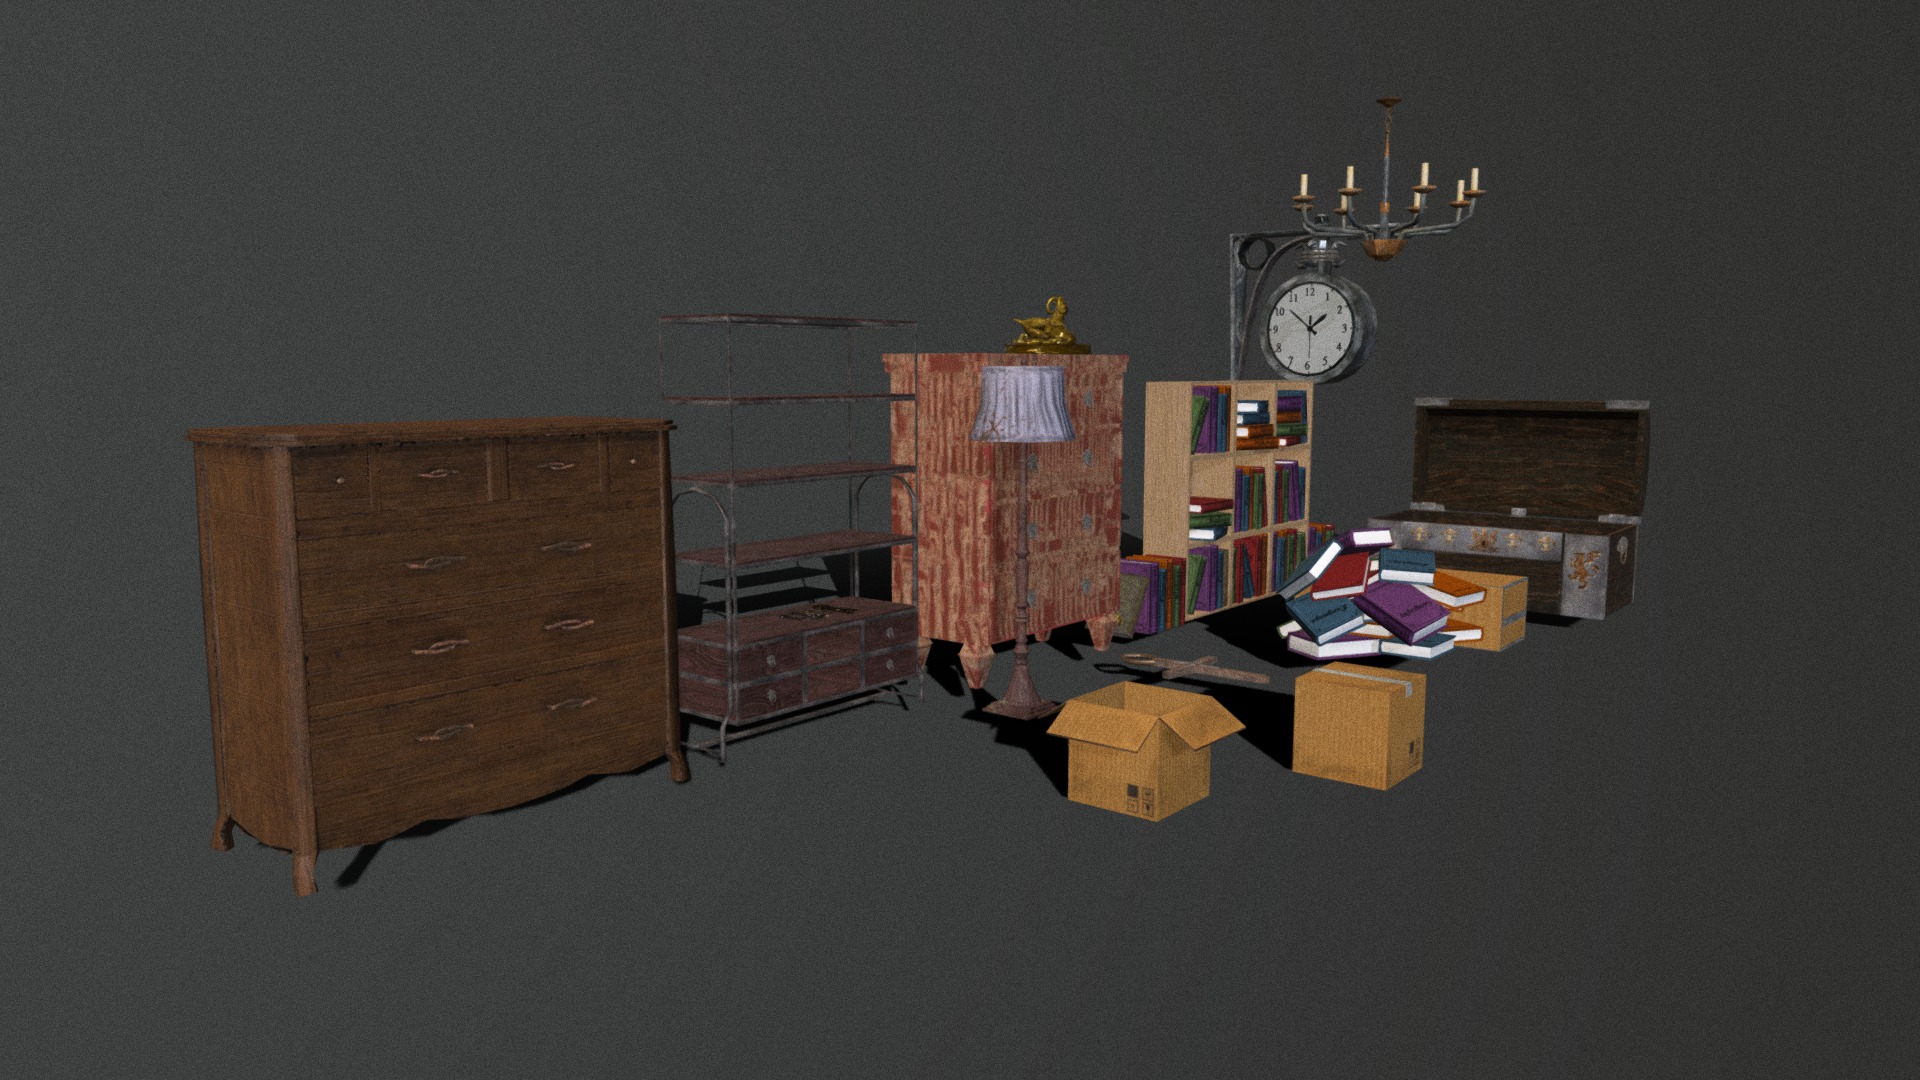 A pack of Horror Props Pack to use in a level ready for a game engine with all the assets has 27528 verts 24591 polys 49532 tris and each asset includes Diffuse and Normal map except the chandelier and the lits of the pack includes: 

Bookshelf
Boxes
Chandelier
Chest
Clock
Cross
Drawers
Furniture 01
Furniture 02
Goat Figurine
Keys
Lamp

If you need game assets for your games I am available for commission works 3d model